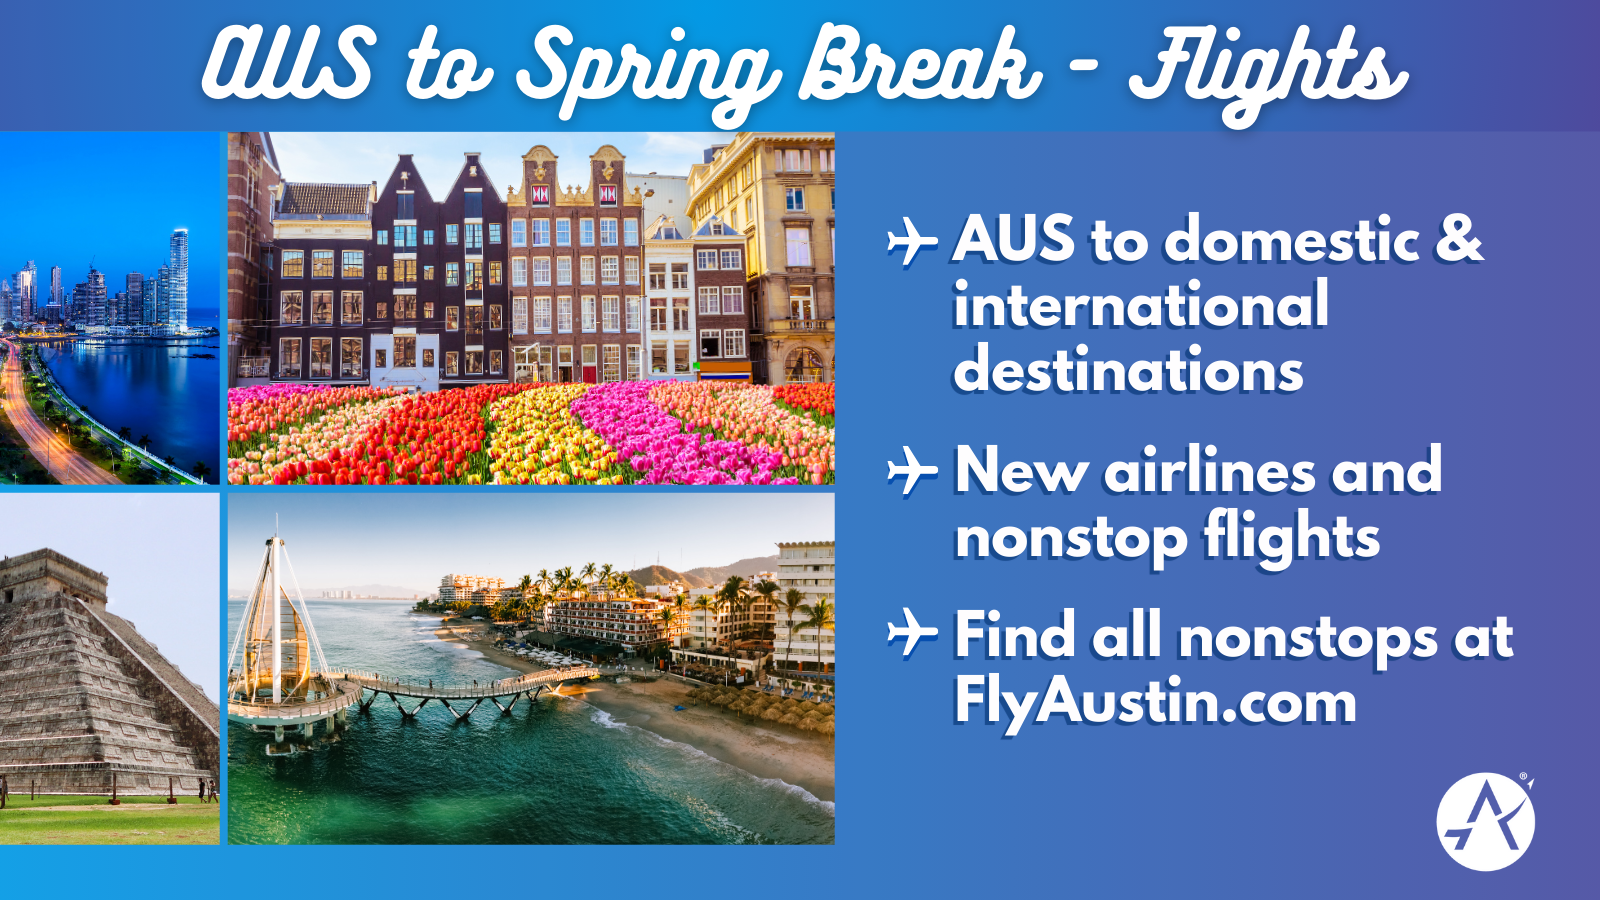 Text reads: AUS to spring break - flights. AUS to domestic & international destinations. New airlines and nonstop flights. Find all nonstops at FlyAustin.com. Photos of different international destinations like Amsterdam are to the left.